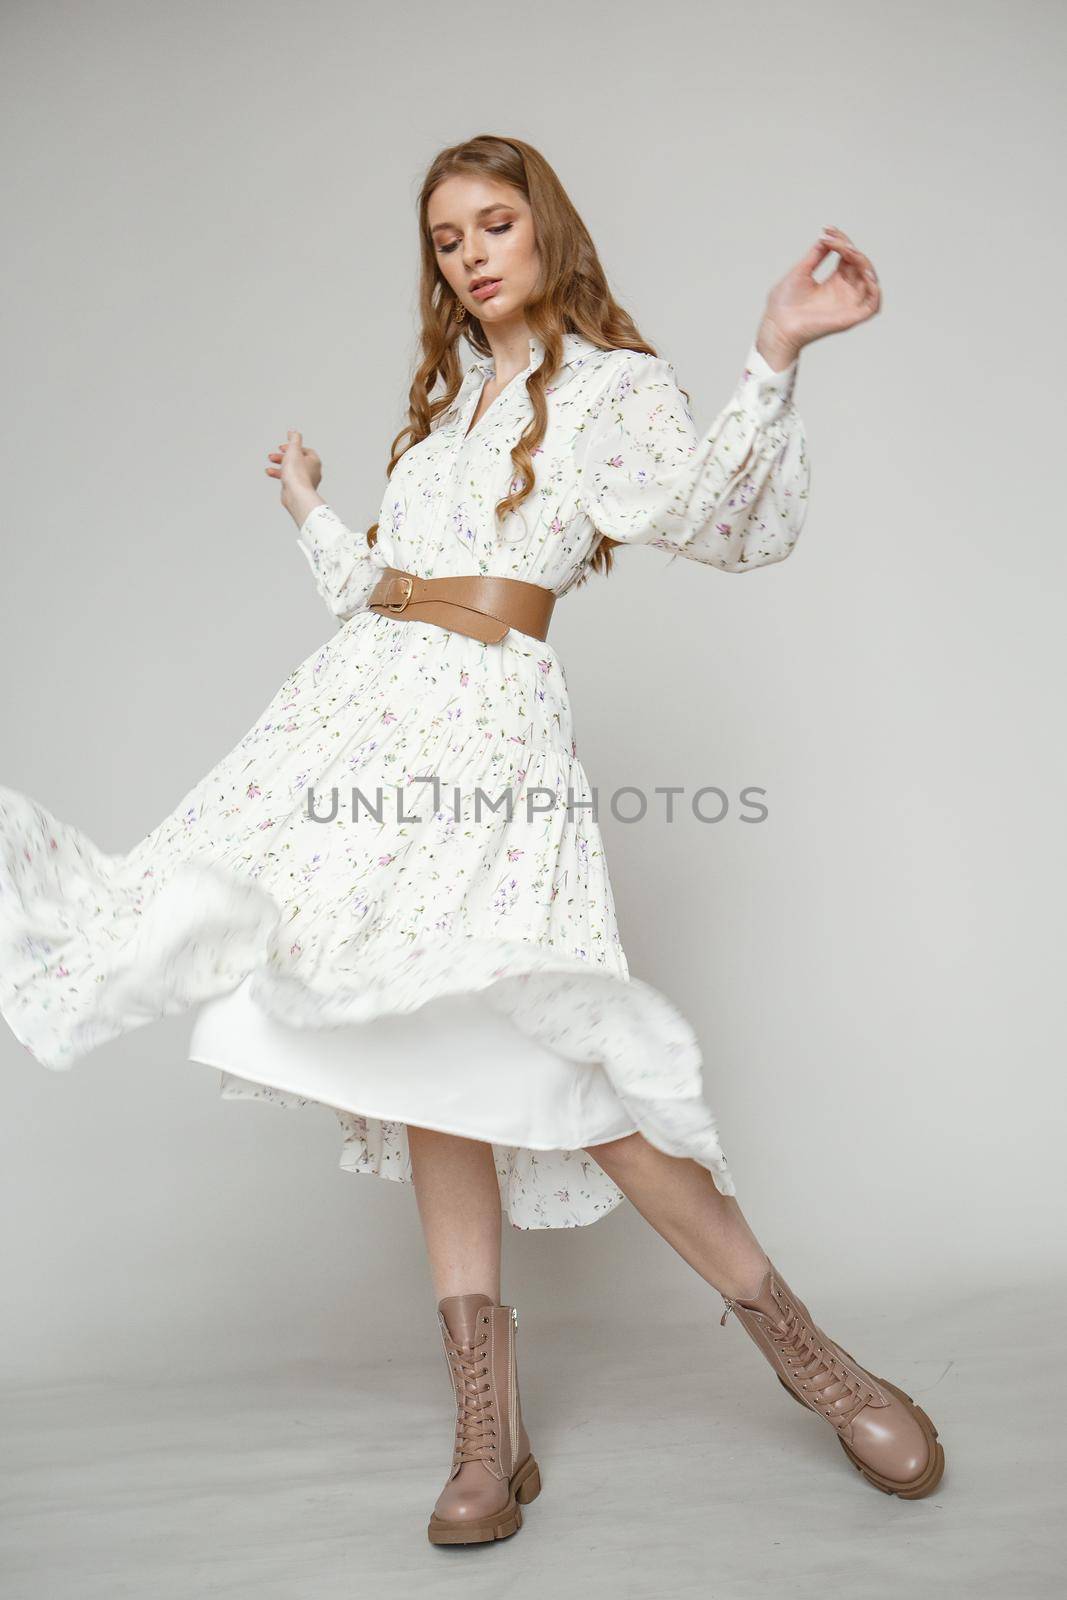 beautiful young girl in flying white dress. Flowing fabric.